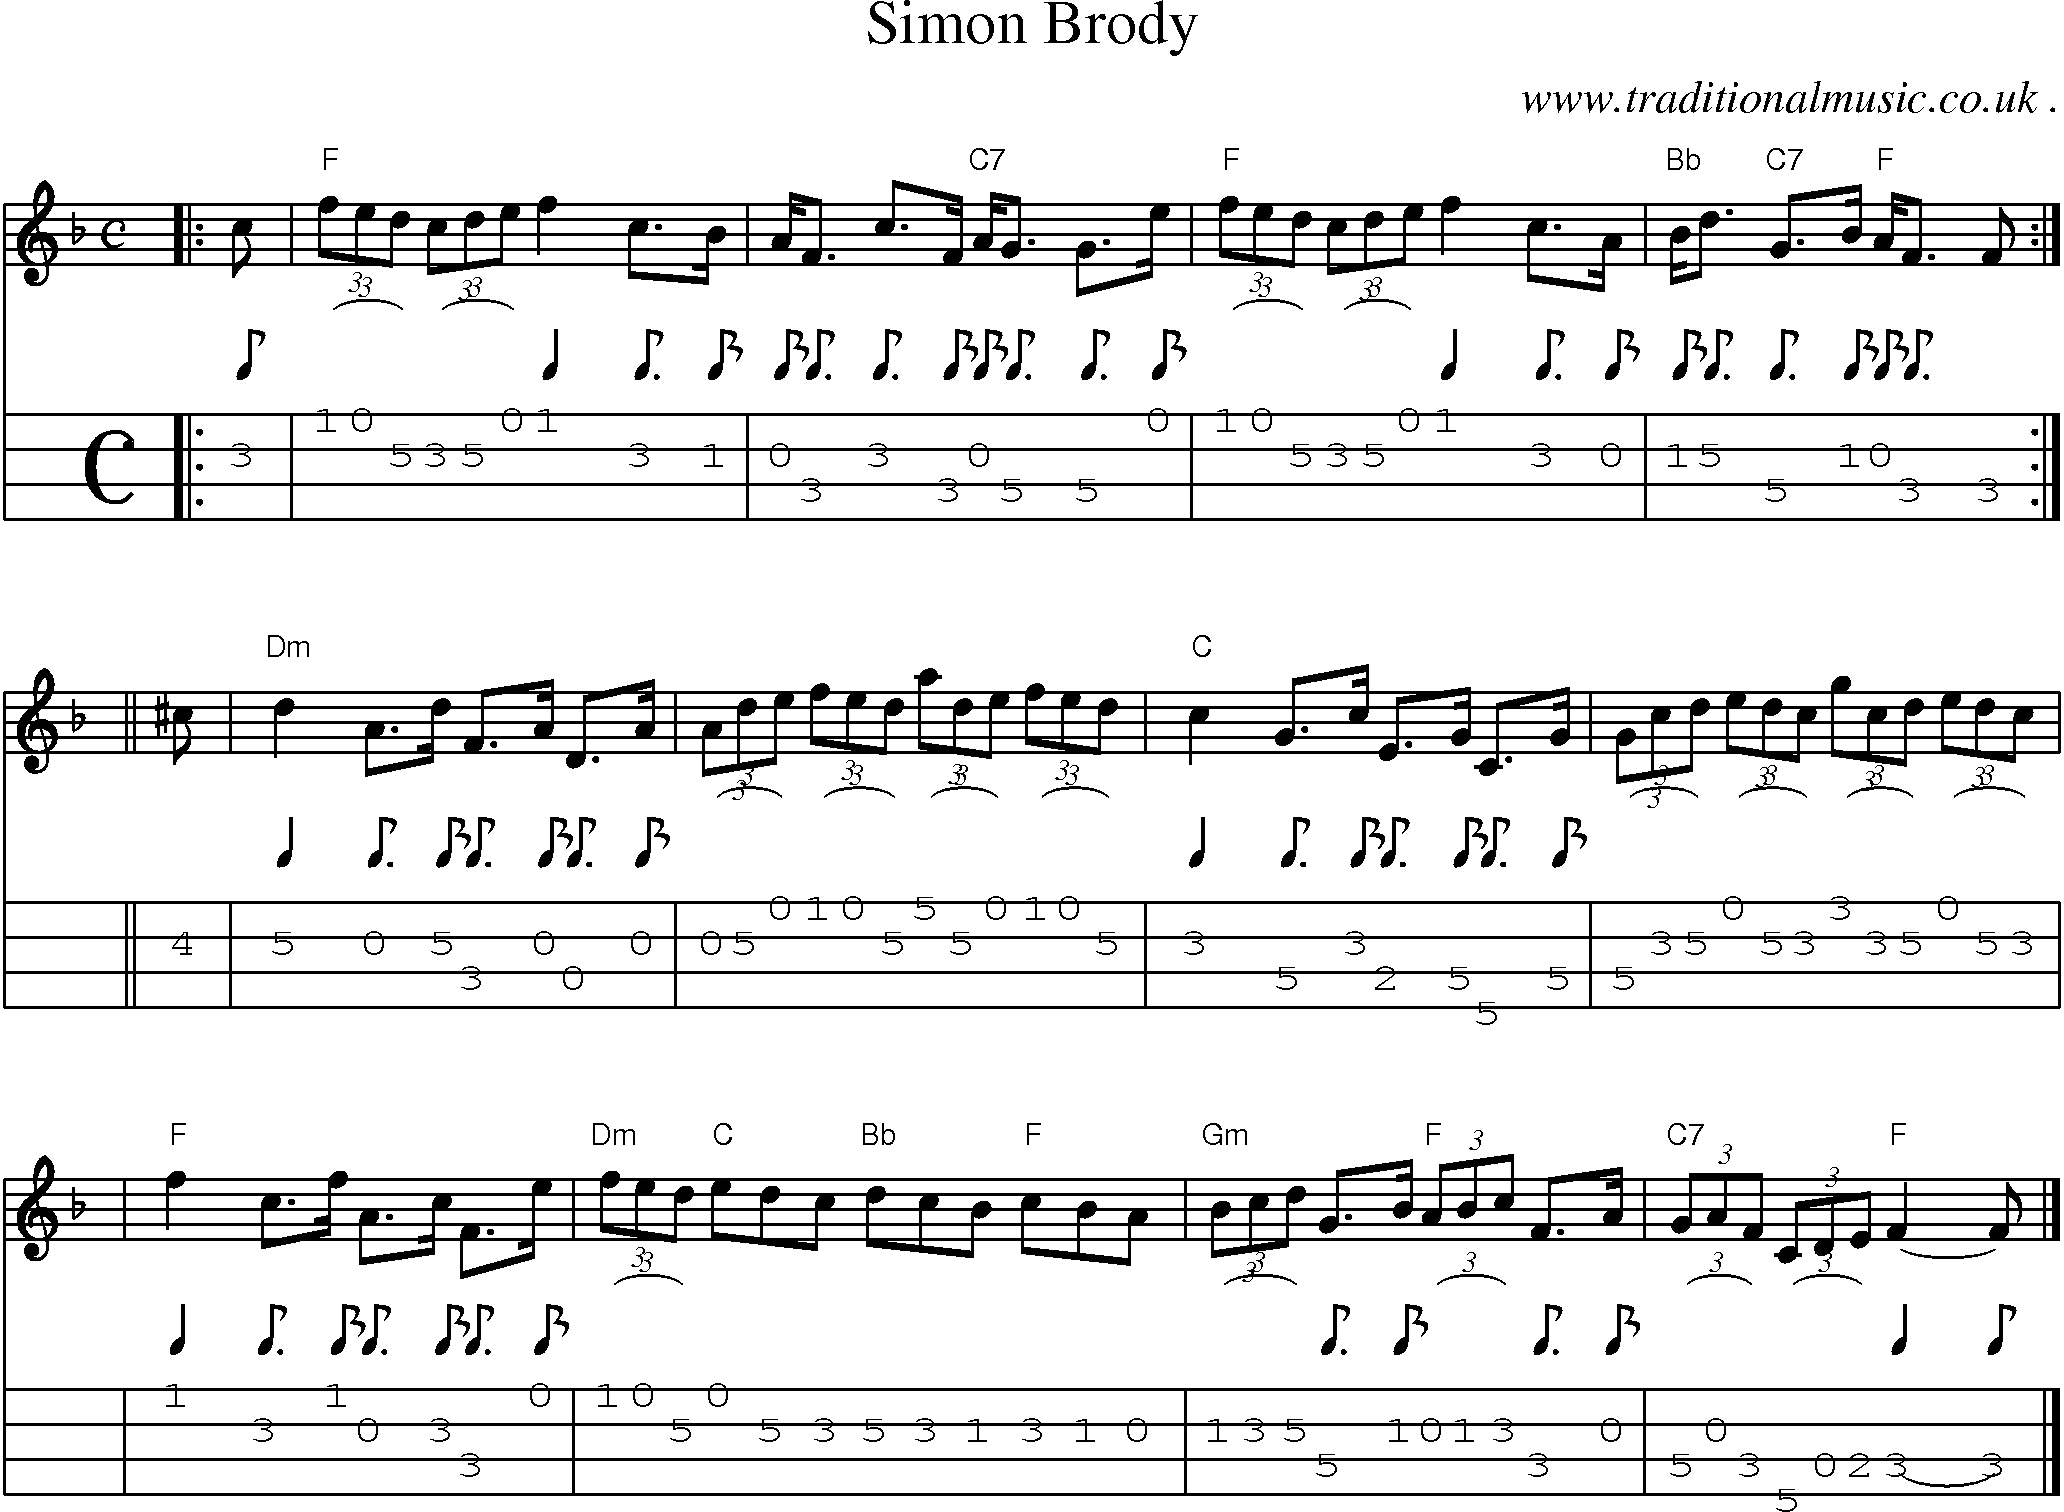 Sheet-music  score, Chords and Mandolin Tabs for Simon Brody